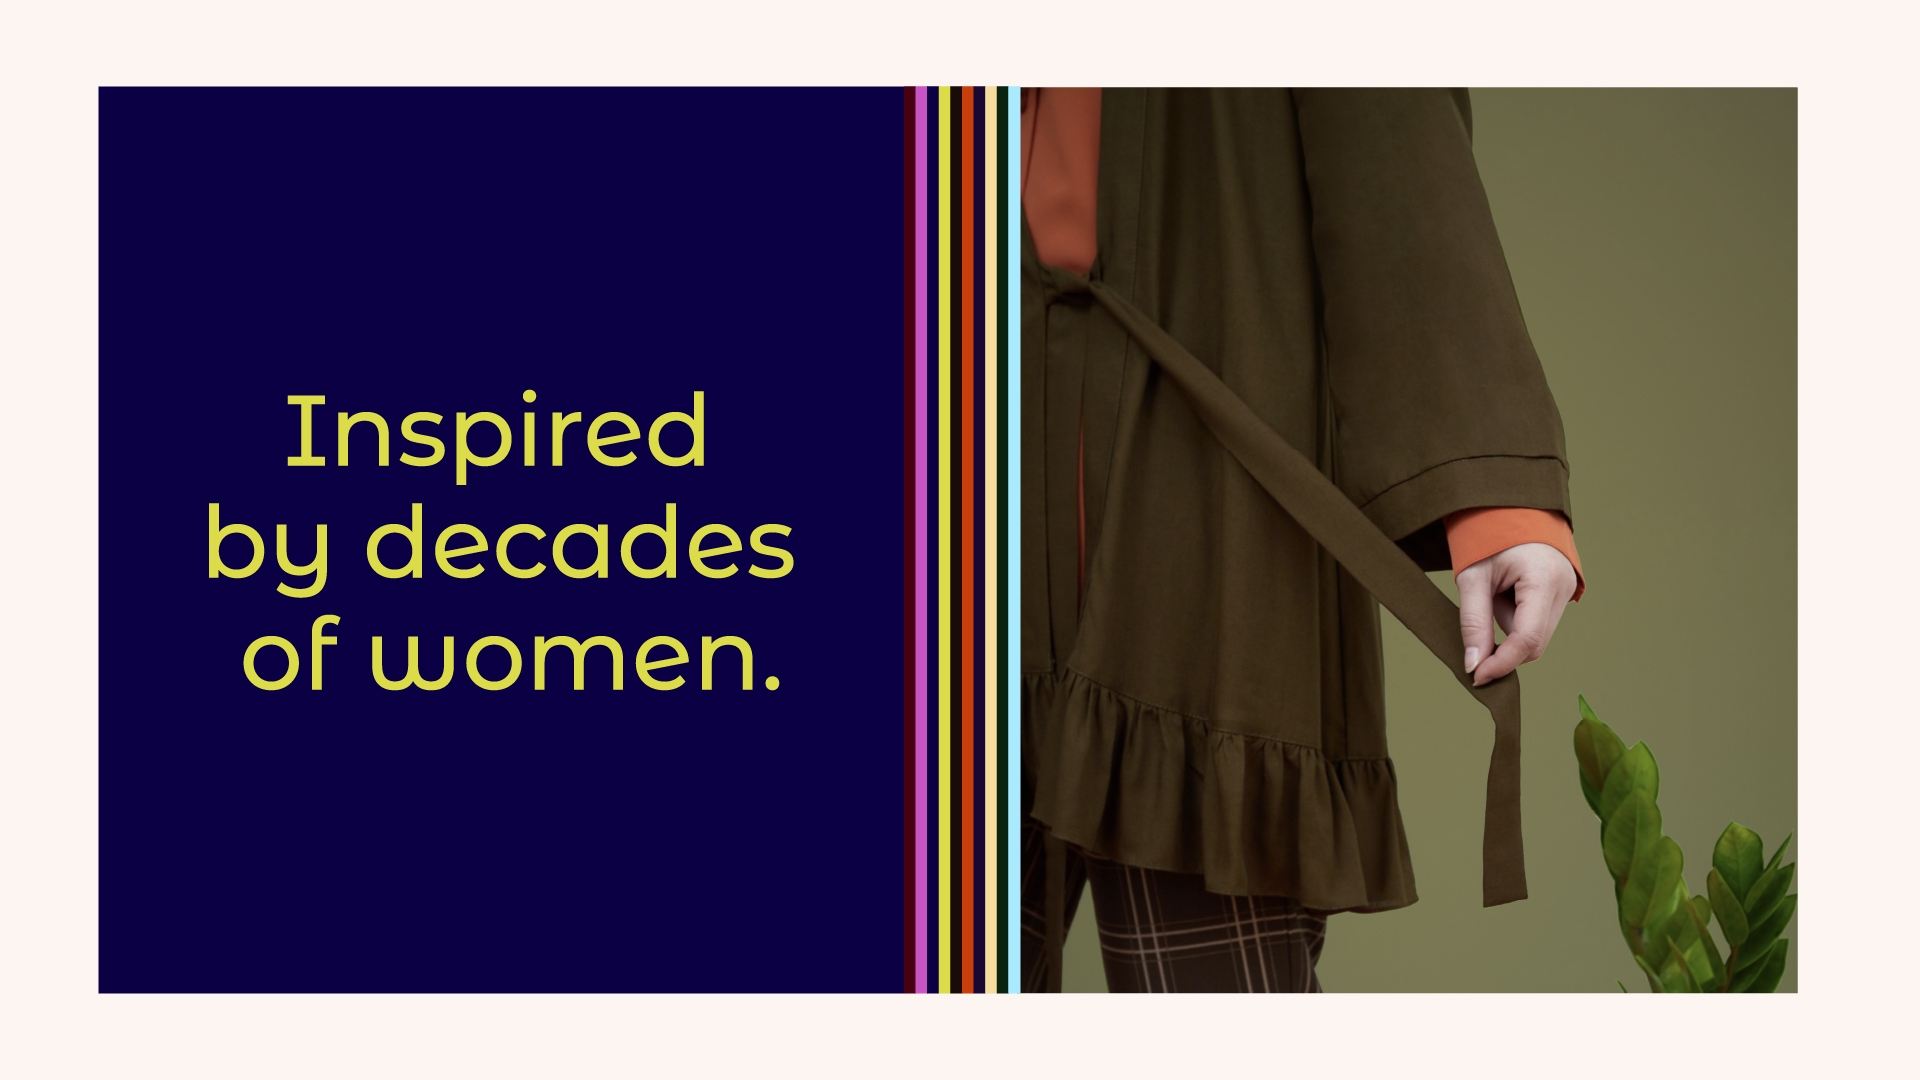 Inspired by decades of women.